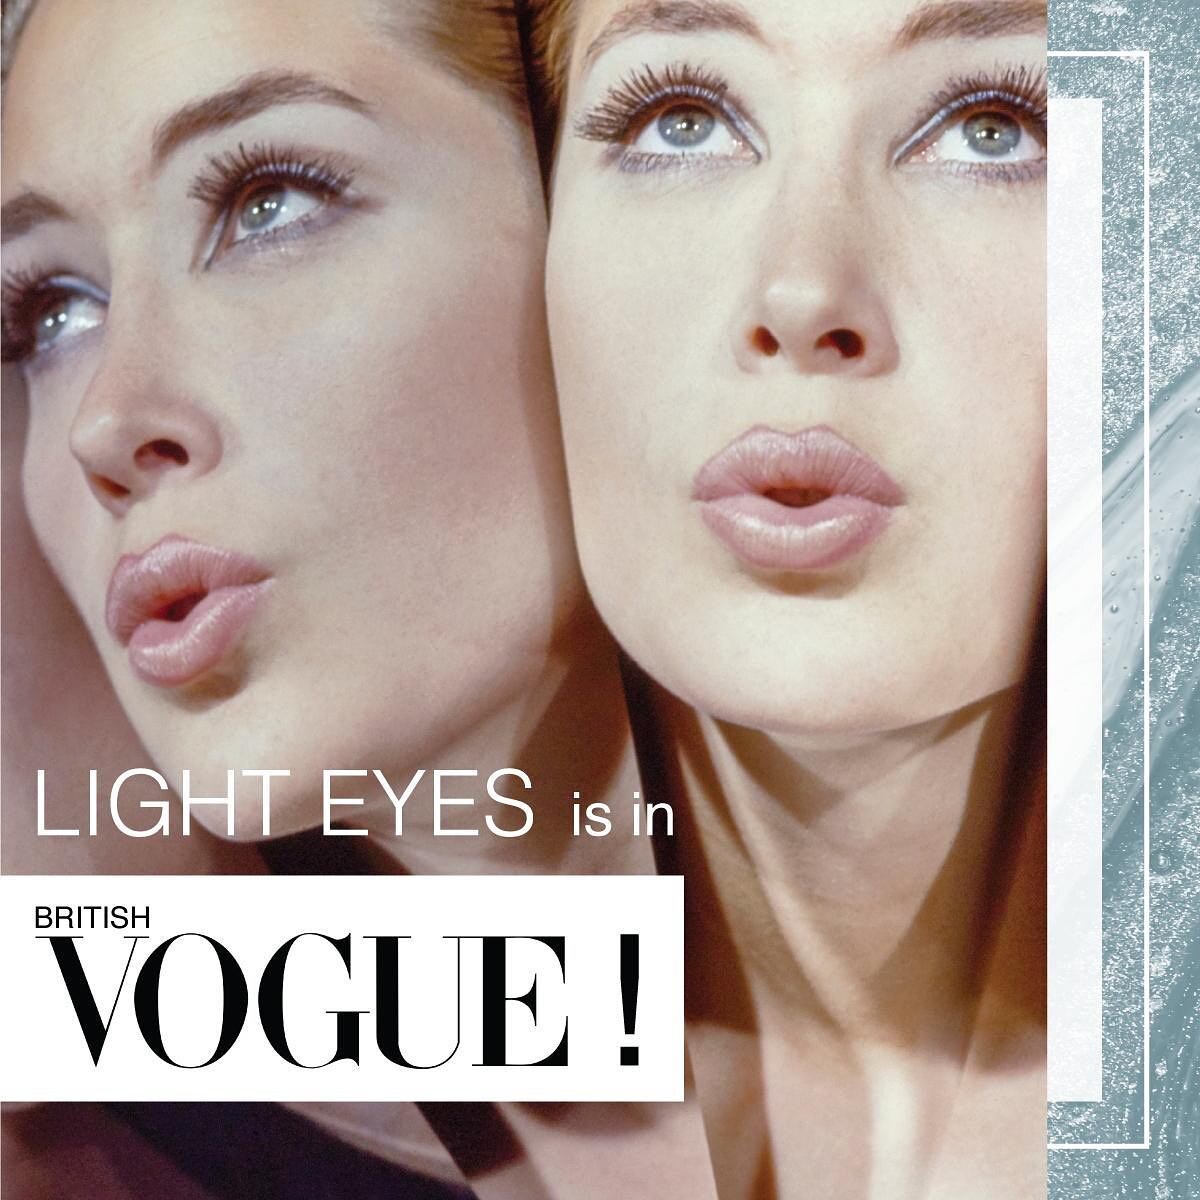 Light Eyes treatment featured in @britishvogue @dr_jana from @malluccilondon talks about our effective mesotheraphy treatment for the eye area. Light Eyes reduces dark circles and water retention (puffie eyes) around the eyes. 🤗 Light Eyes is a safe